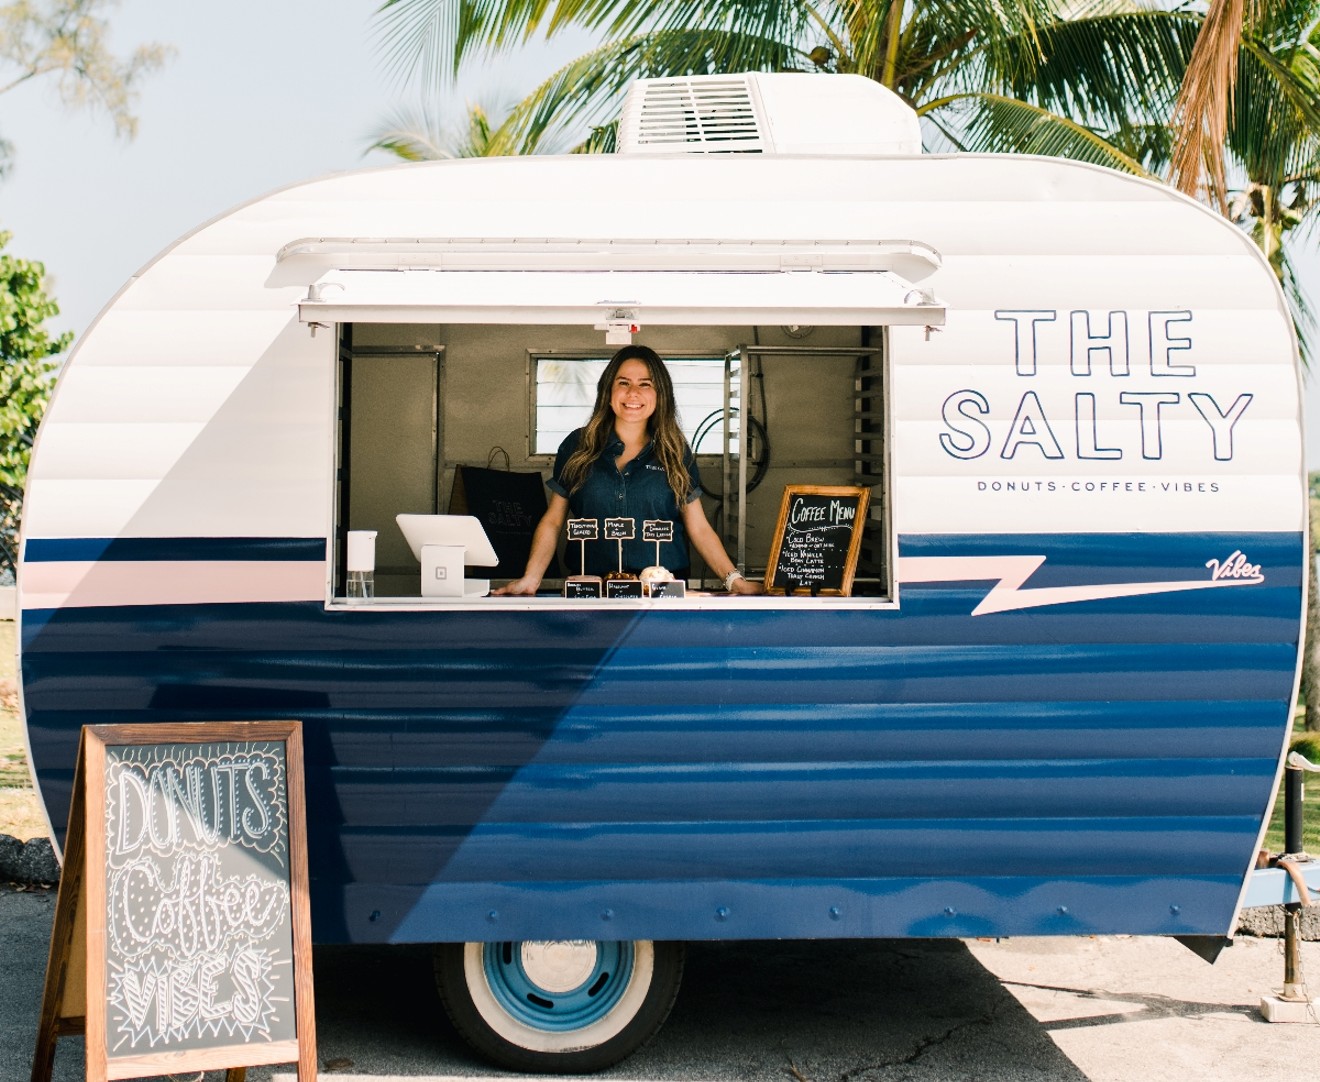 The Salty Donut Trailer is now a permanent fixture on Lincoln Road.